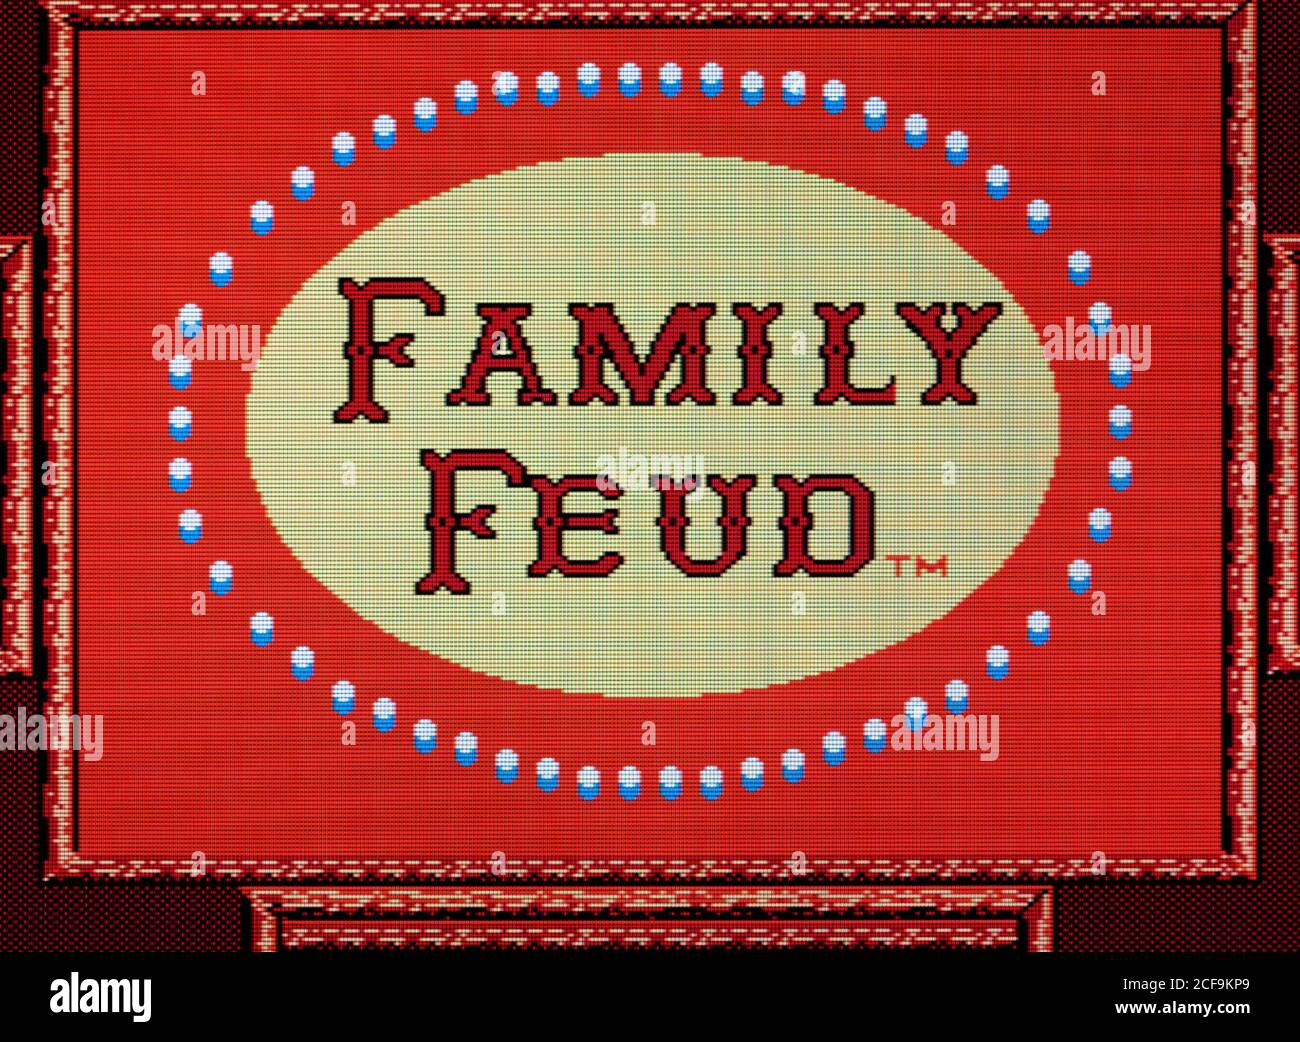 Family Feud - Nintendo Entertainment System - NES Videogame - Editorial use only Stock Photo